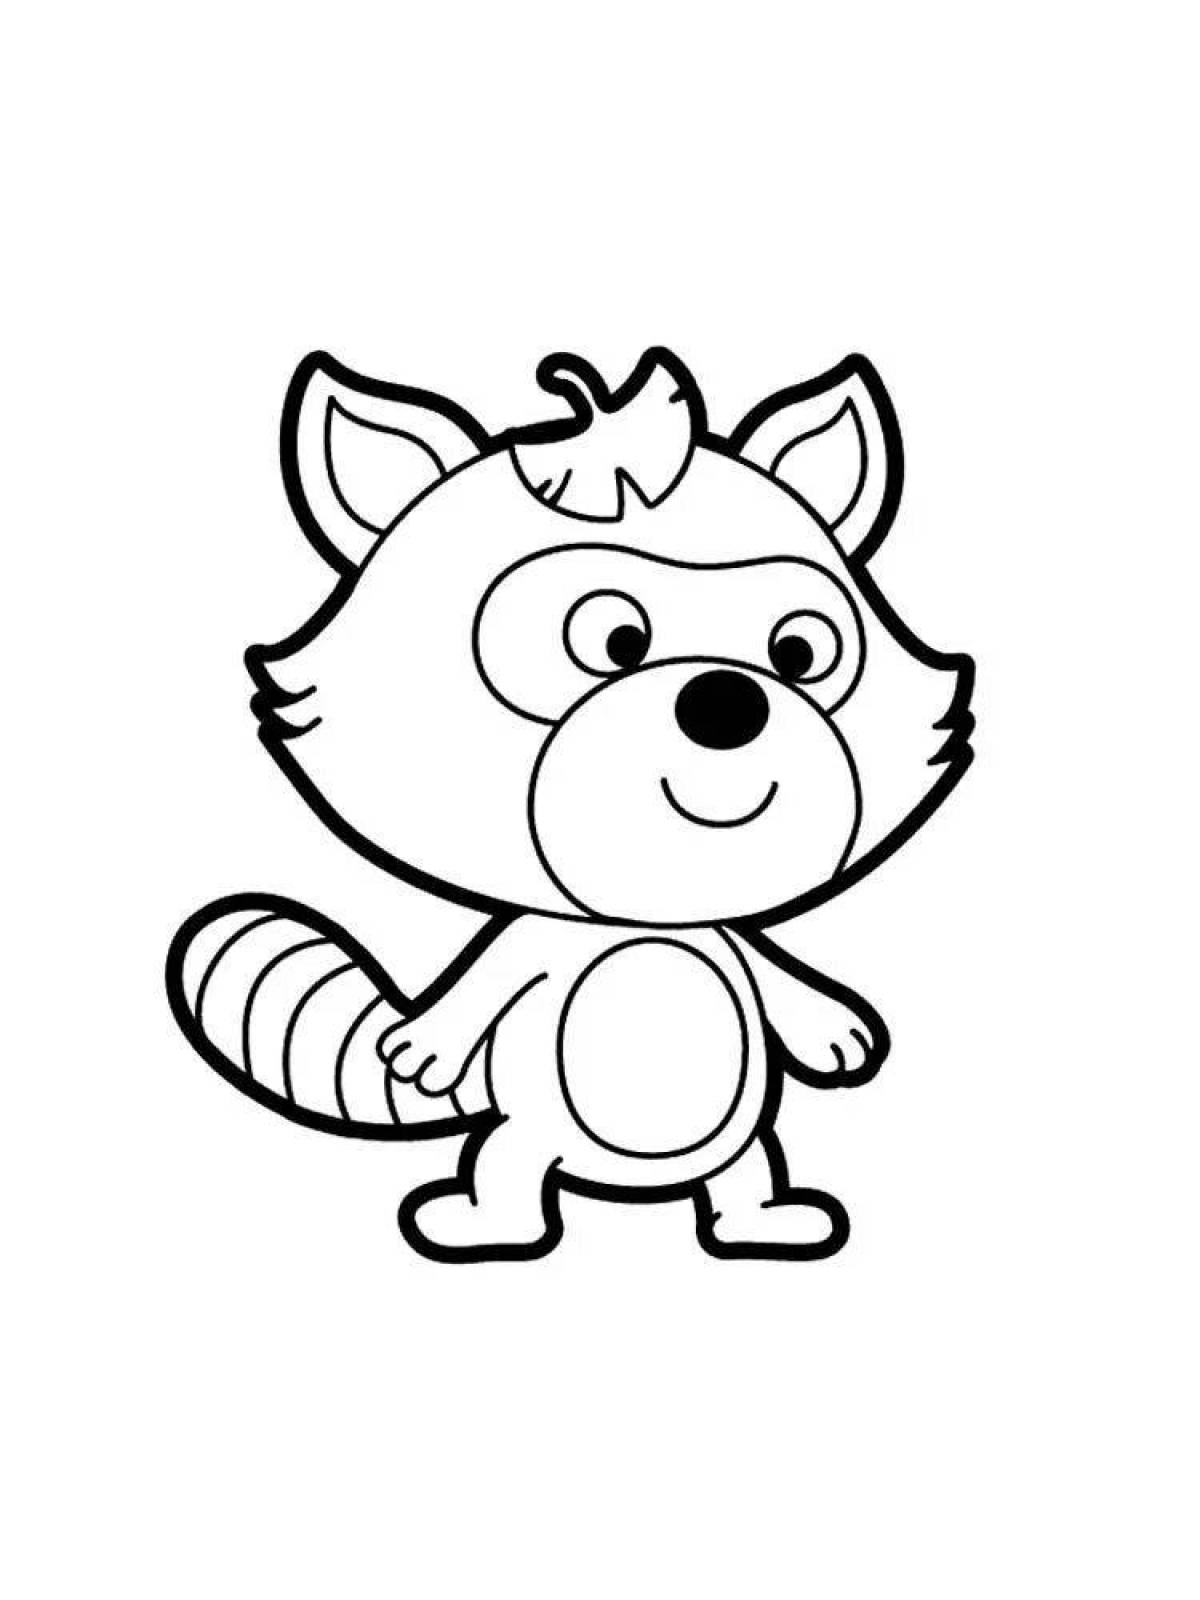 Colorful raccoon coloring page